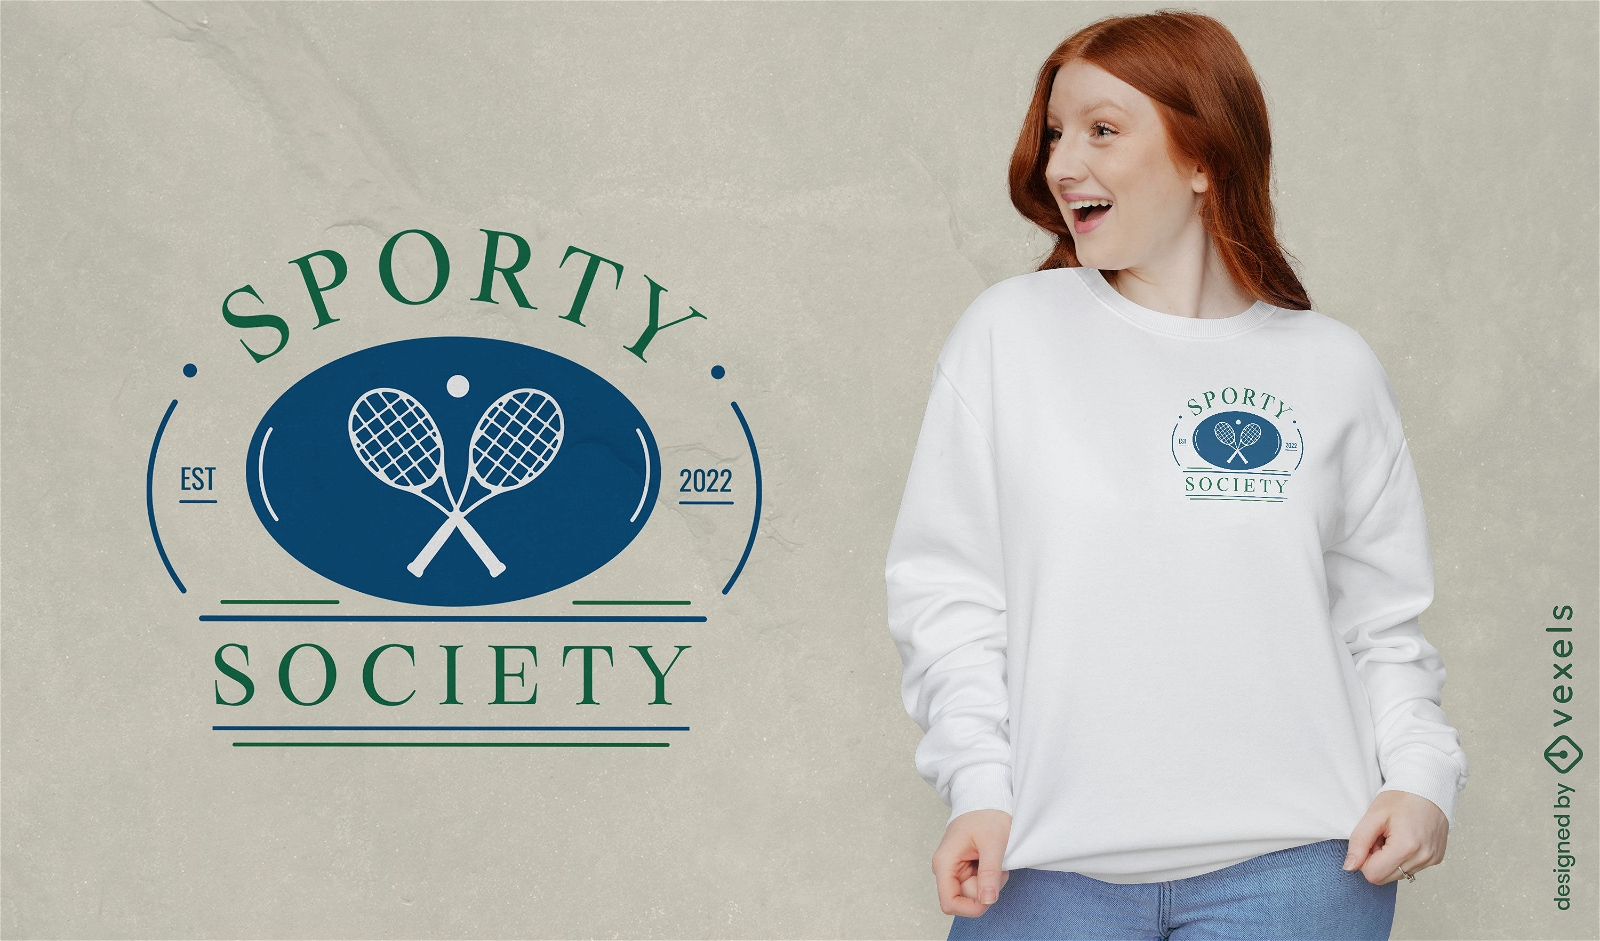 Sporty society quote t-shirt design